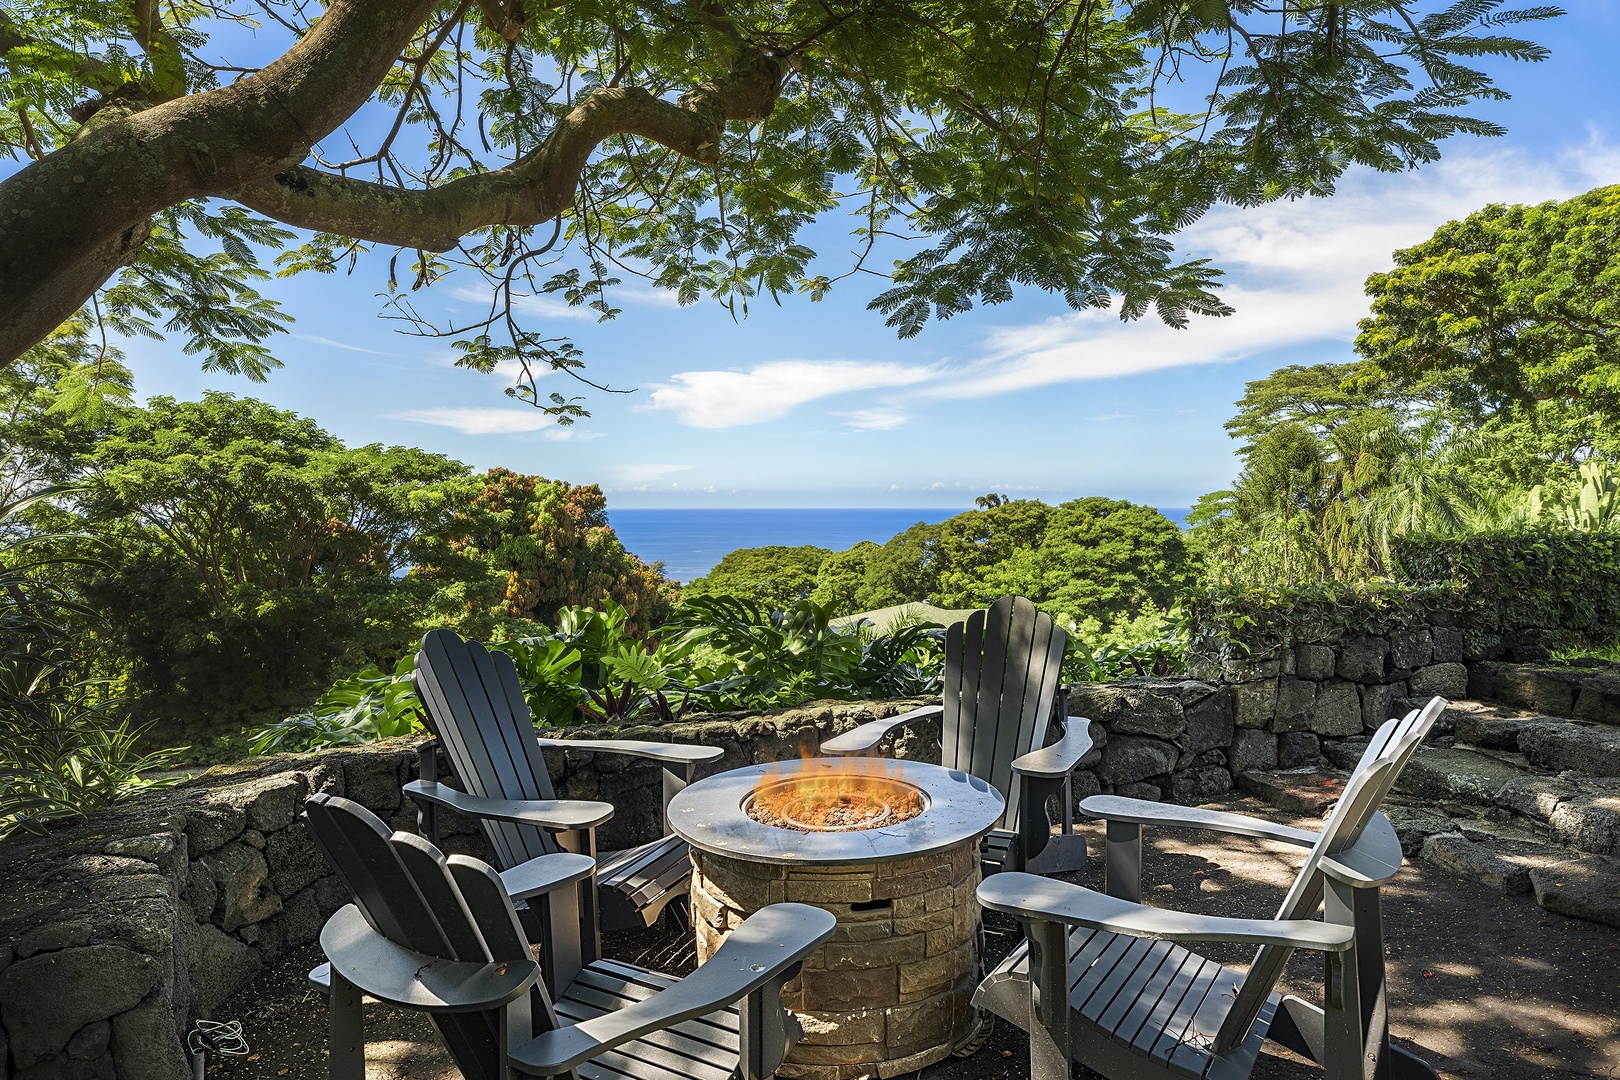 Kailua-Kona Vacation Rentals, Hale Joli - Fire Pit for morning coffee or drinks at night